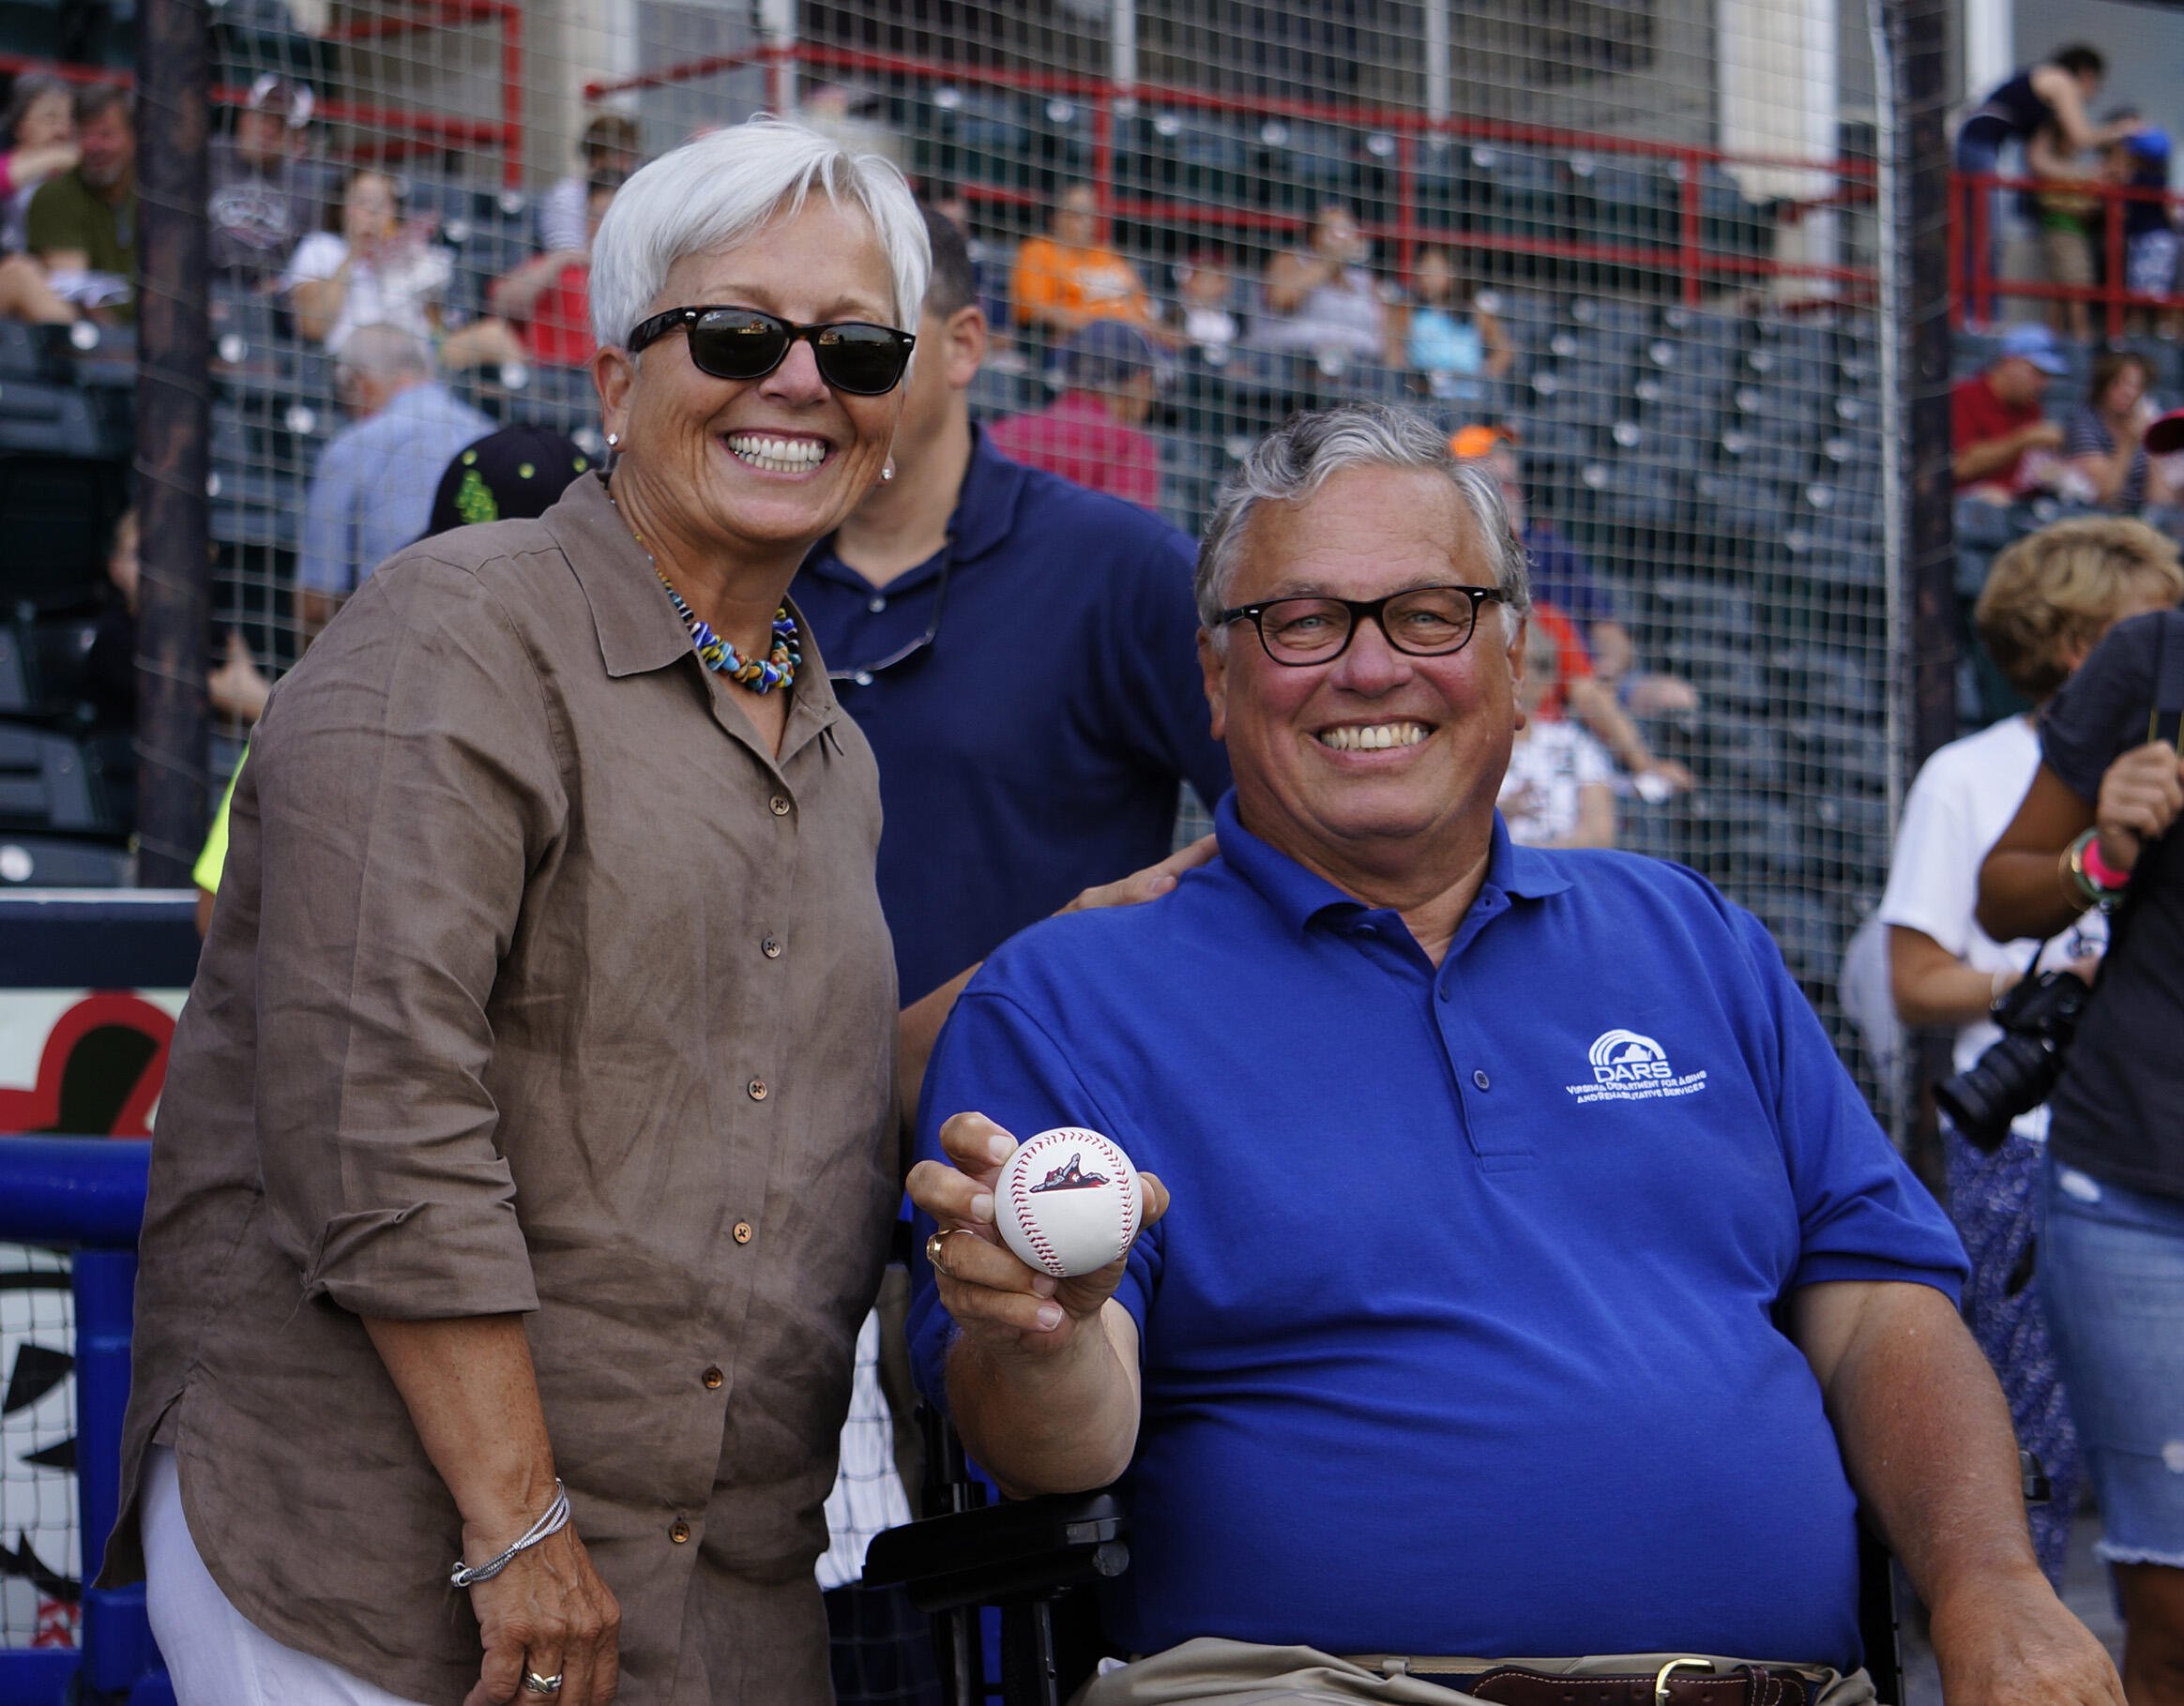 James Rothrock with his wife Jane at a Richmond Squirrels baseball games.